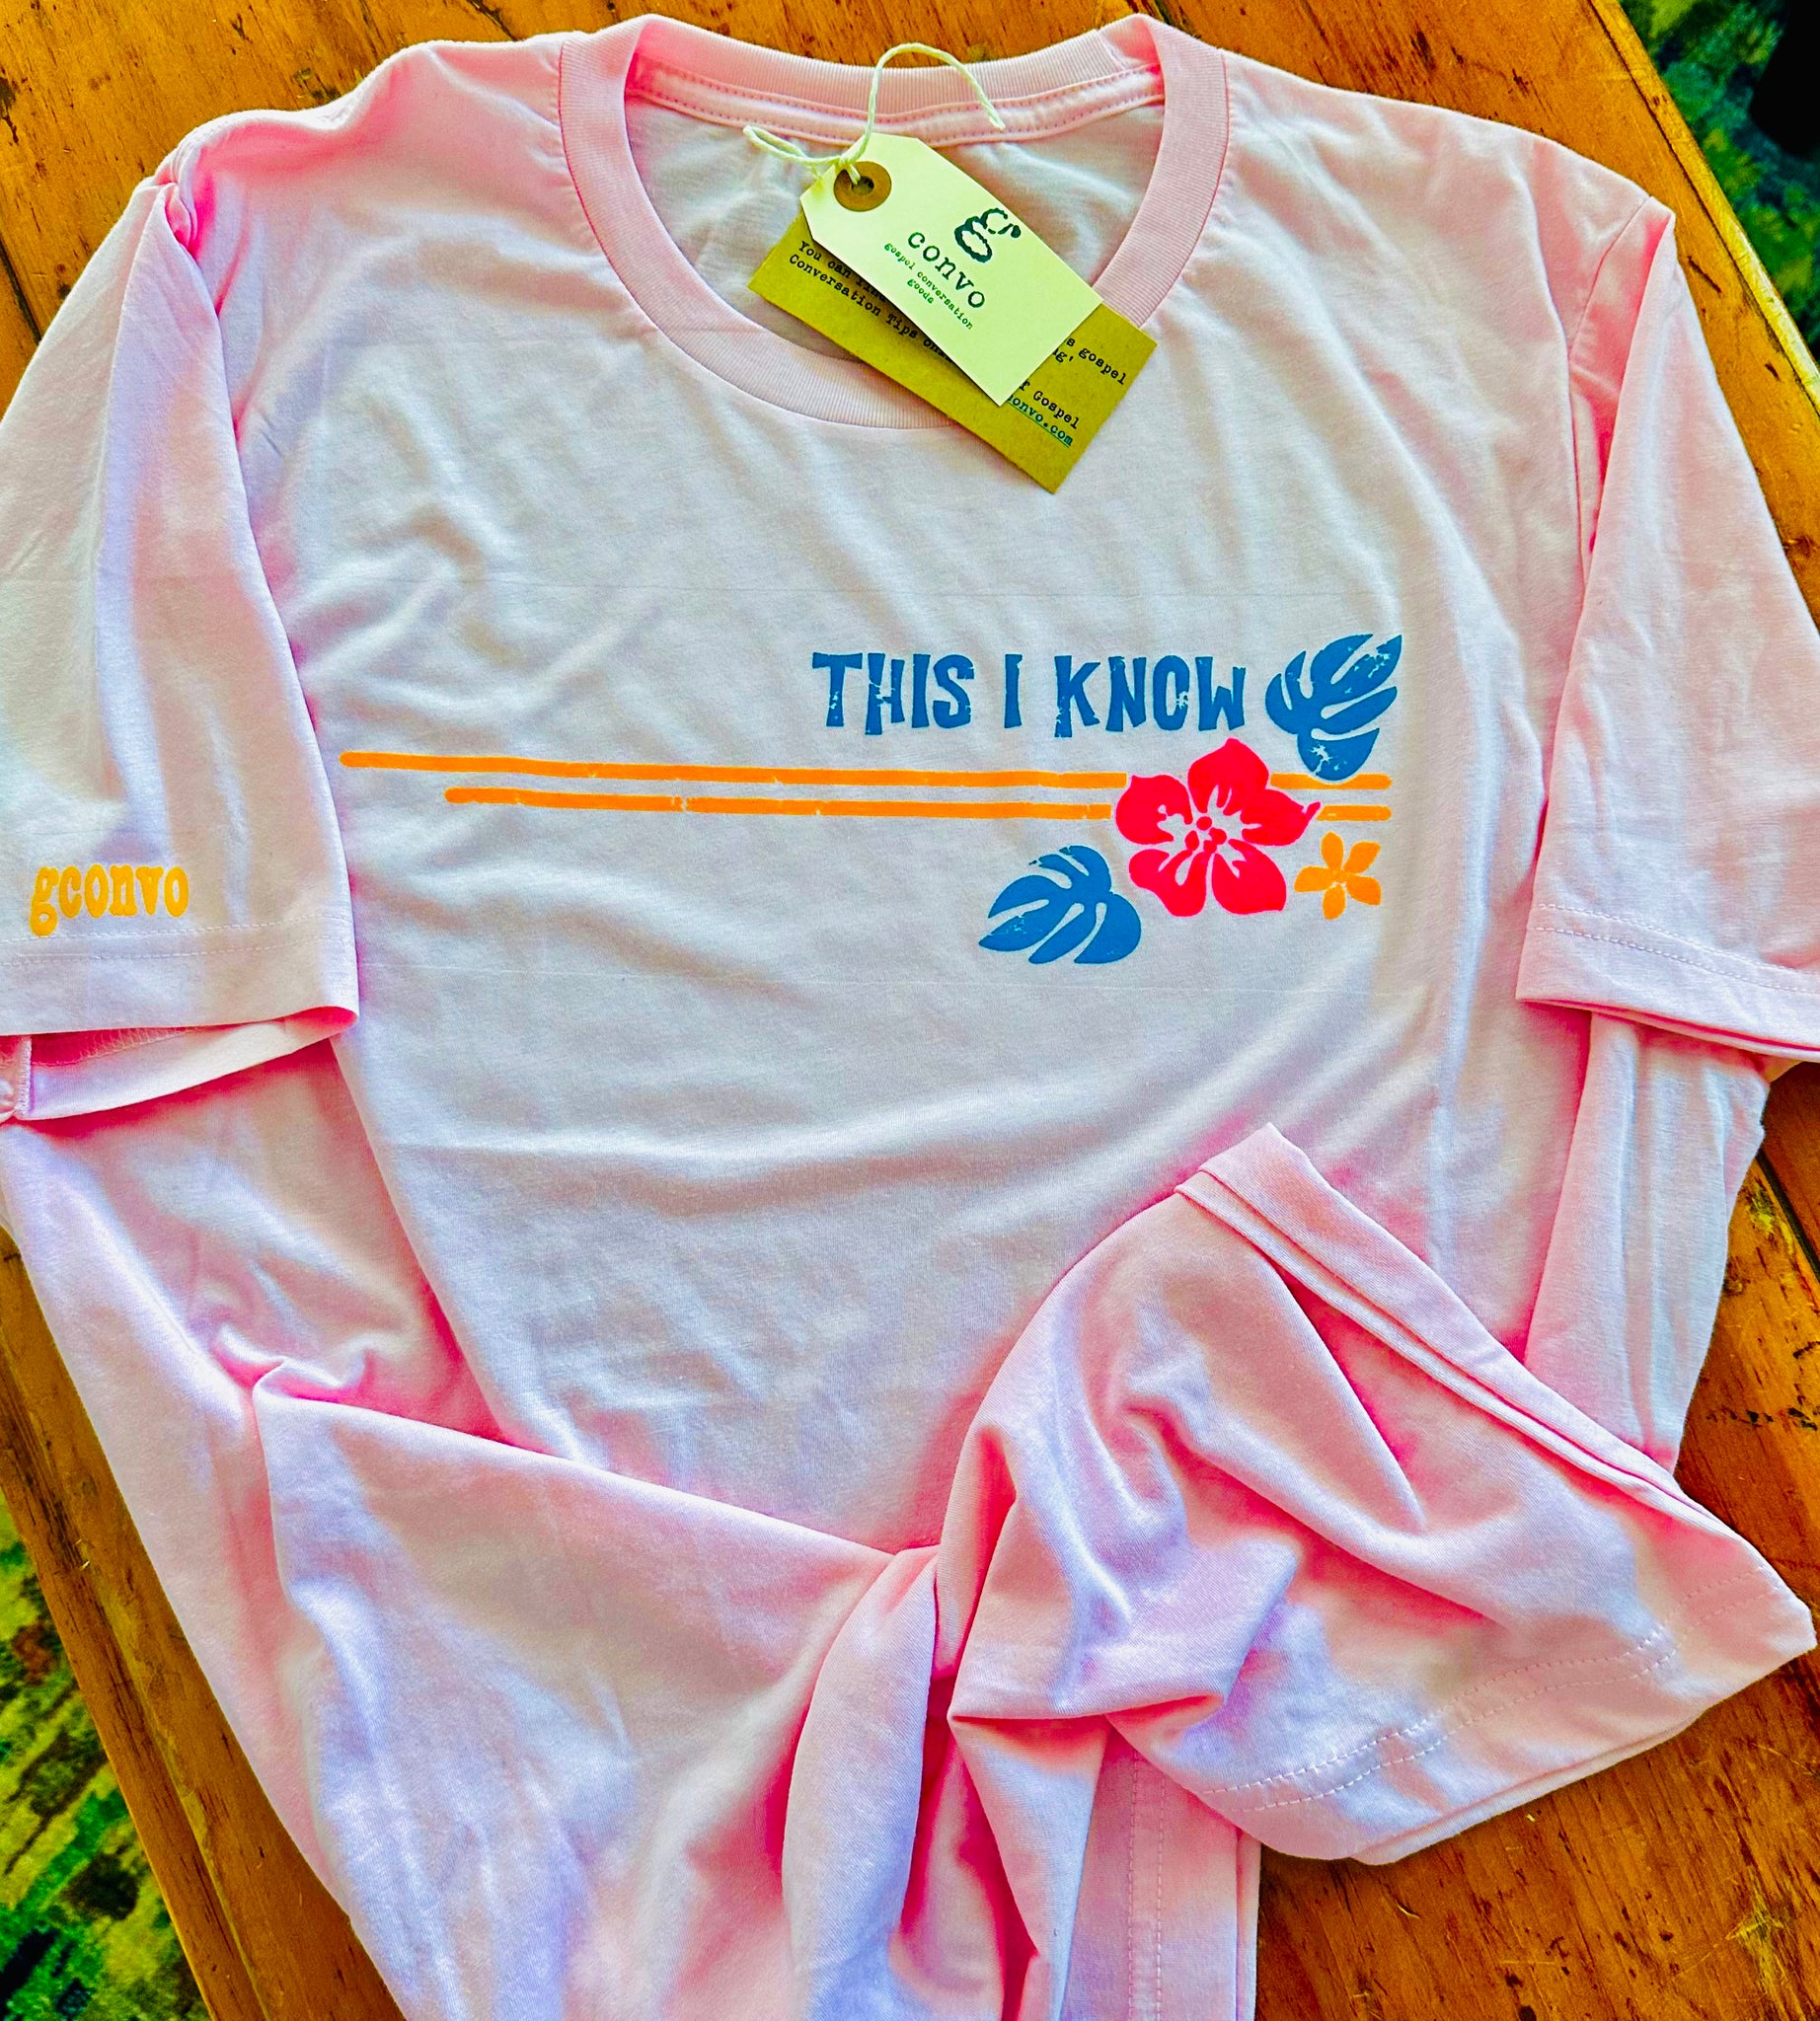 THIS I KNOW Crew Neck Short Sleeve Tee, Pink, Tri-Blend